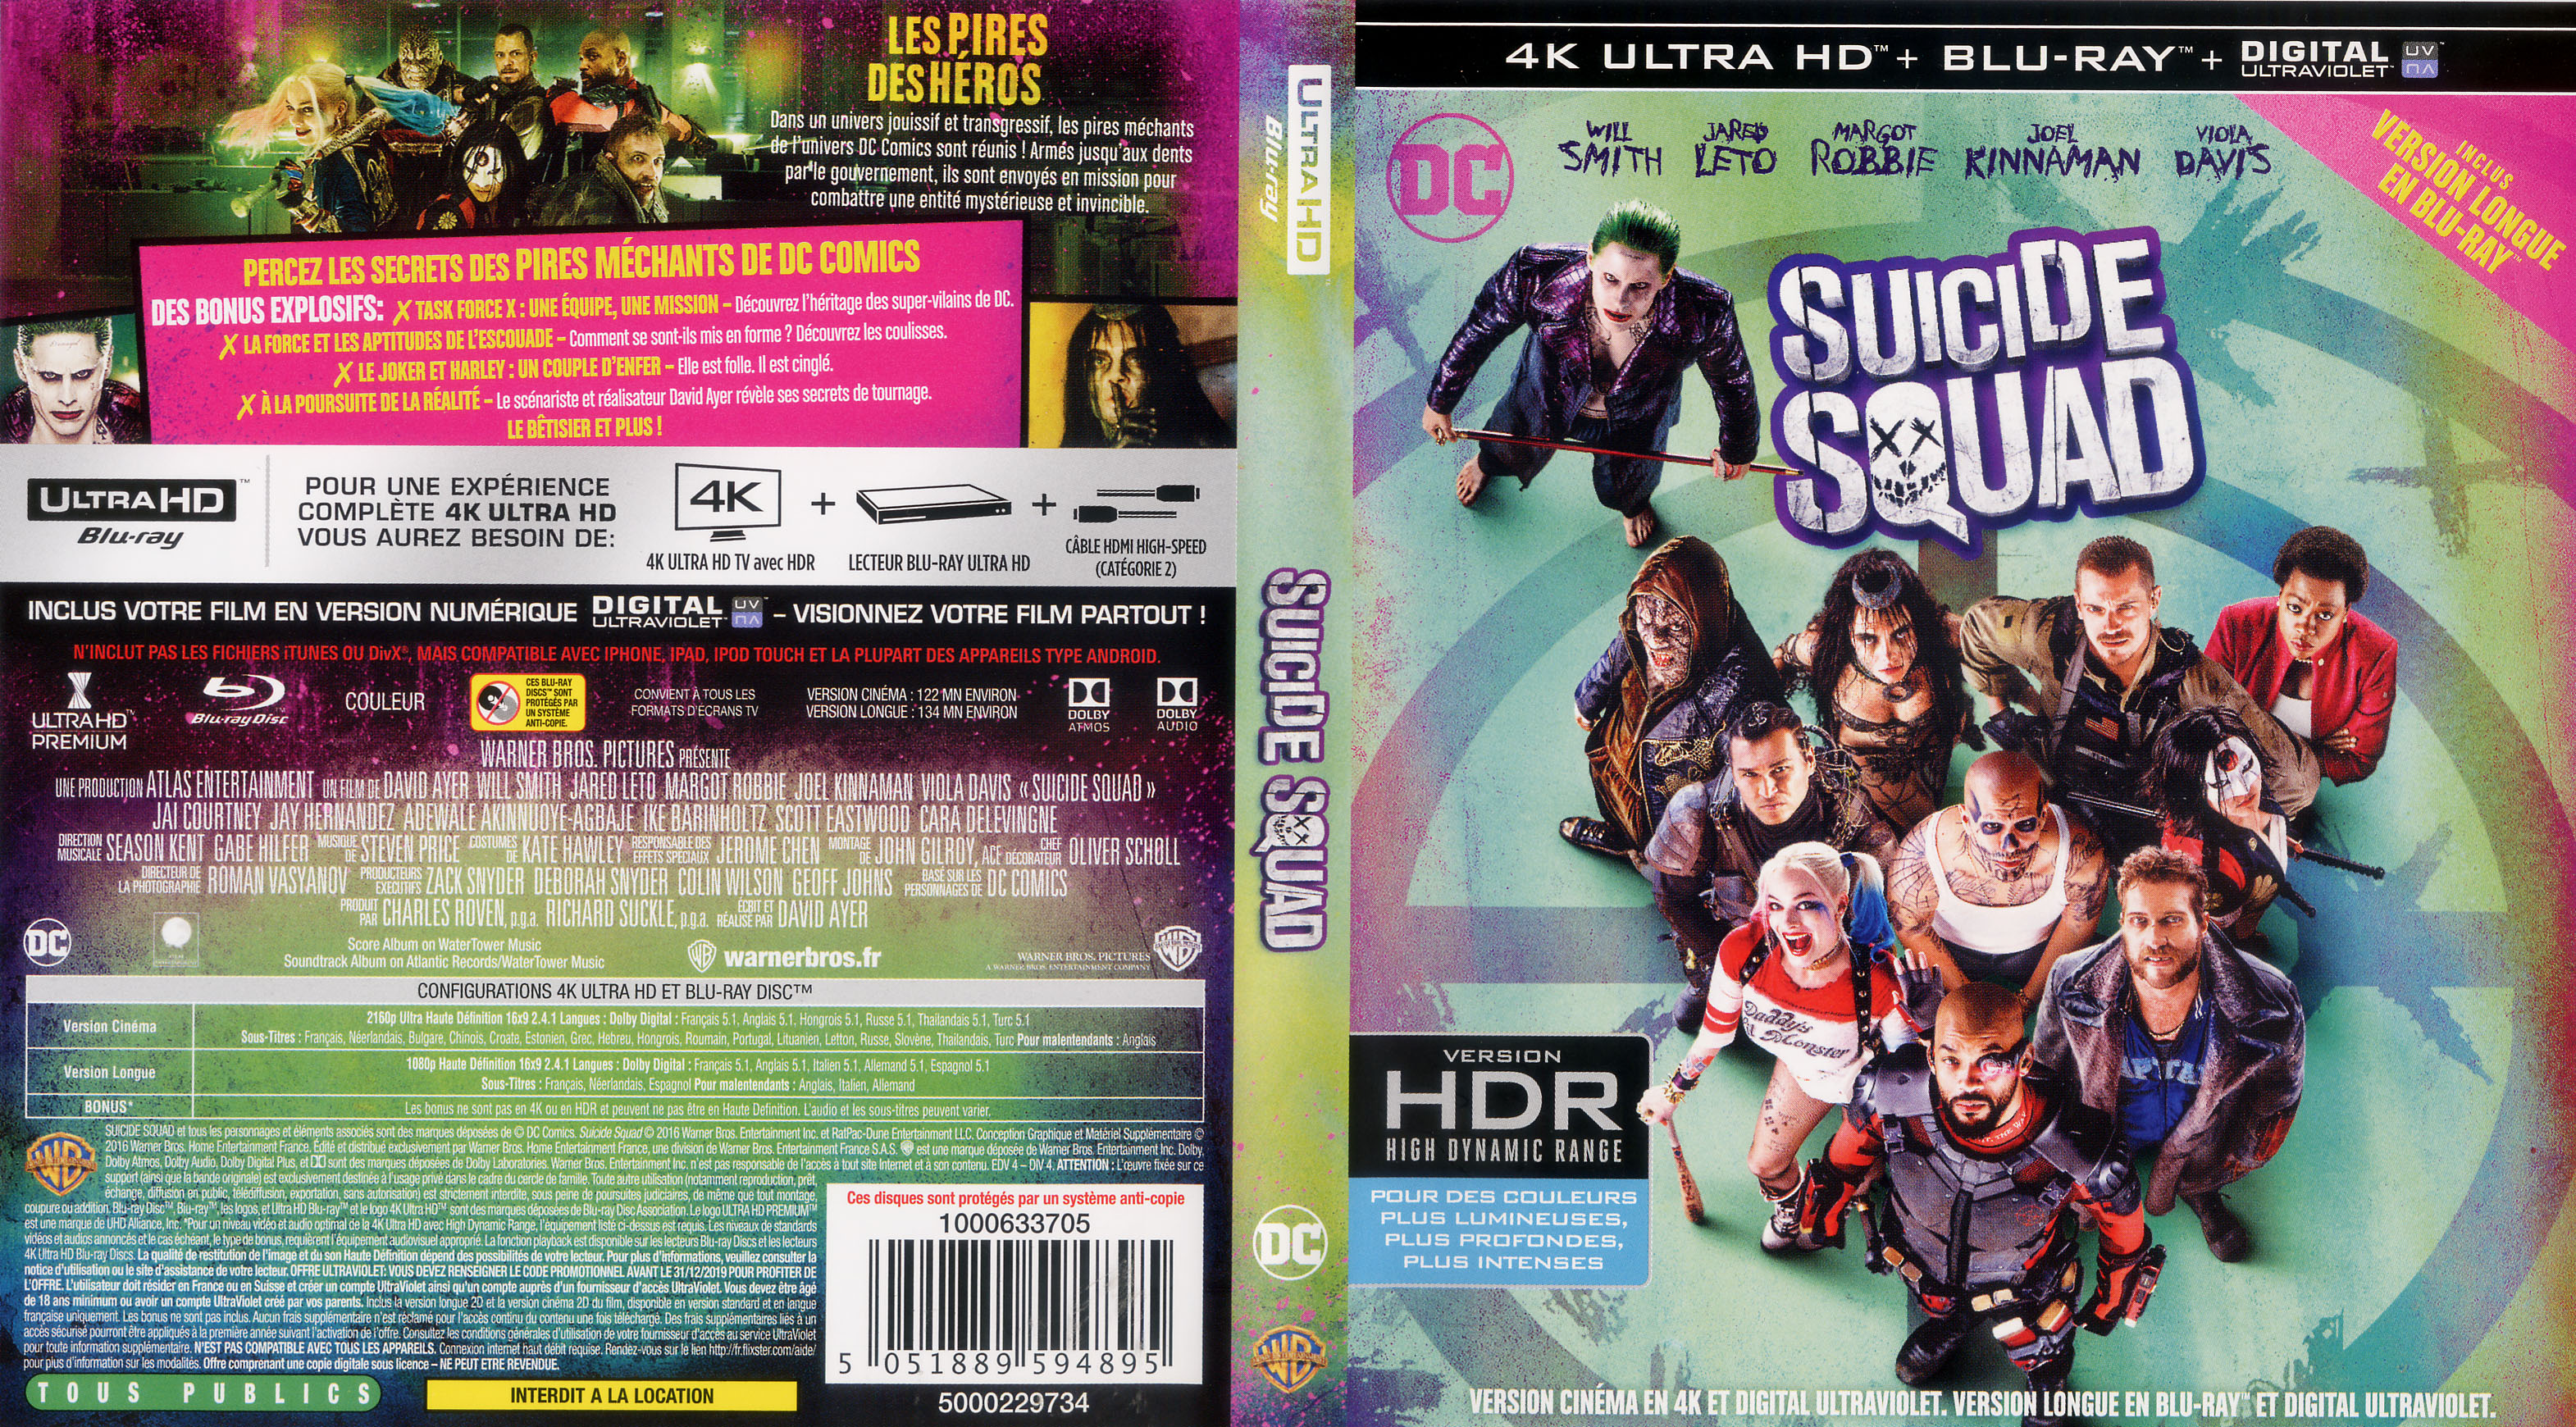 Jaquette DVD Suicide Squad 4K (BLU-RAY)